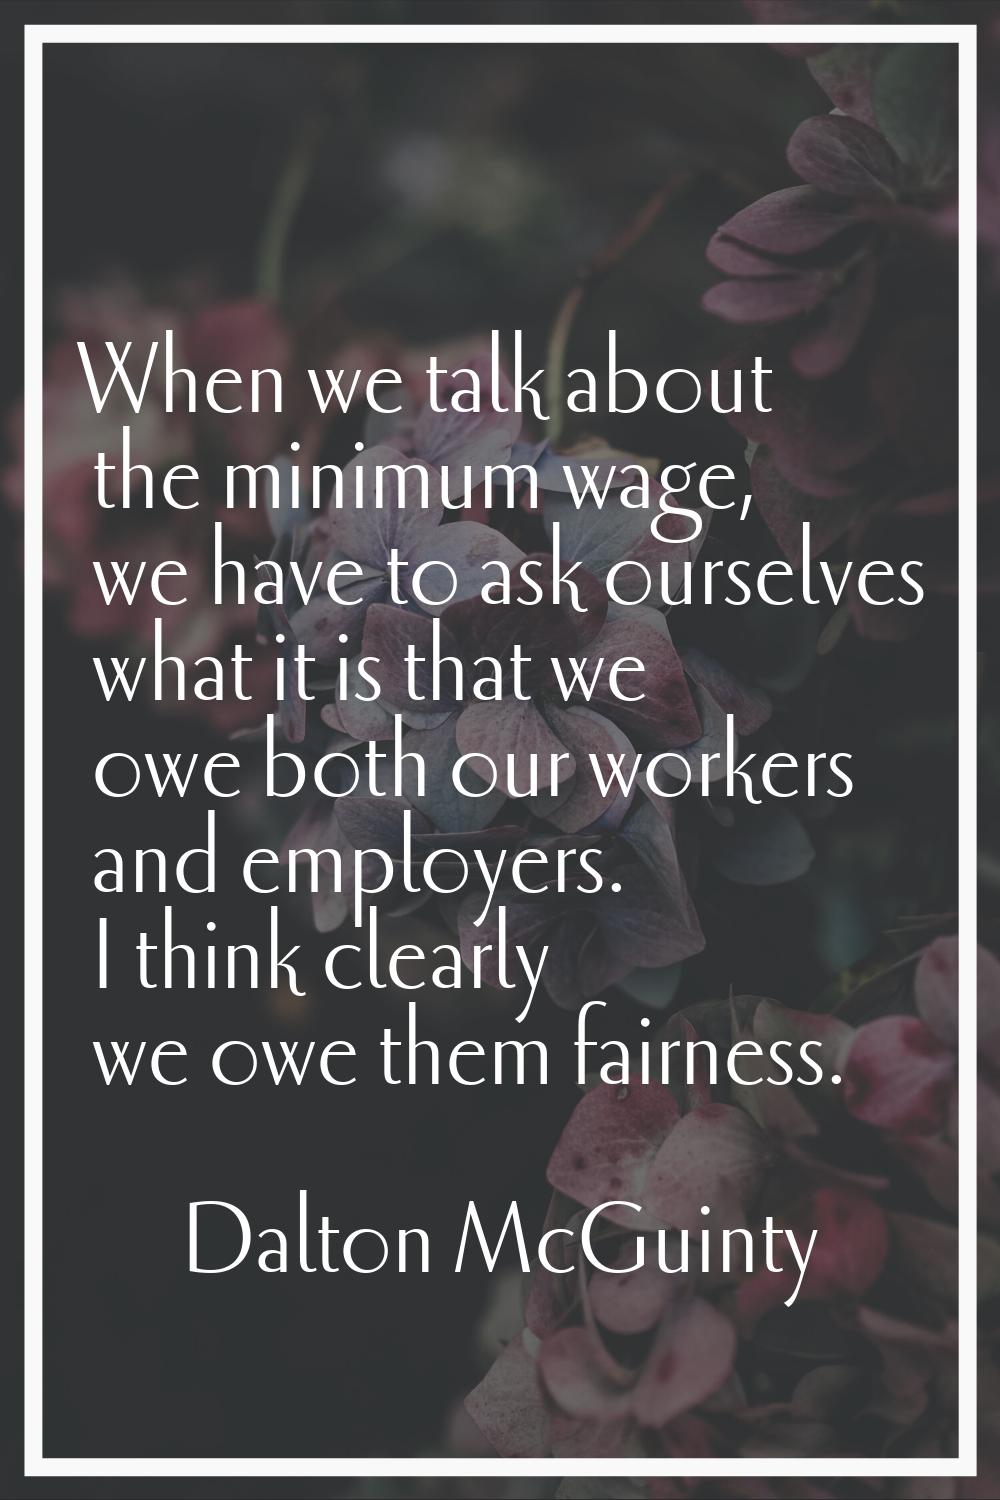 When we talk about the minimum wage, we have to ask ourselves what it is that we owe both our worke